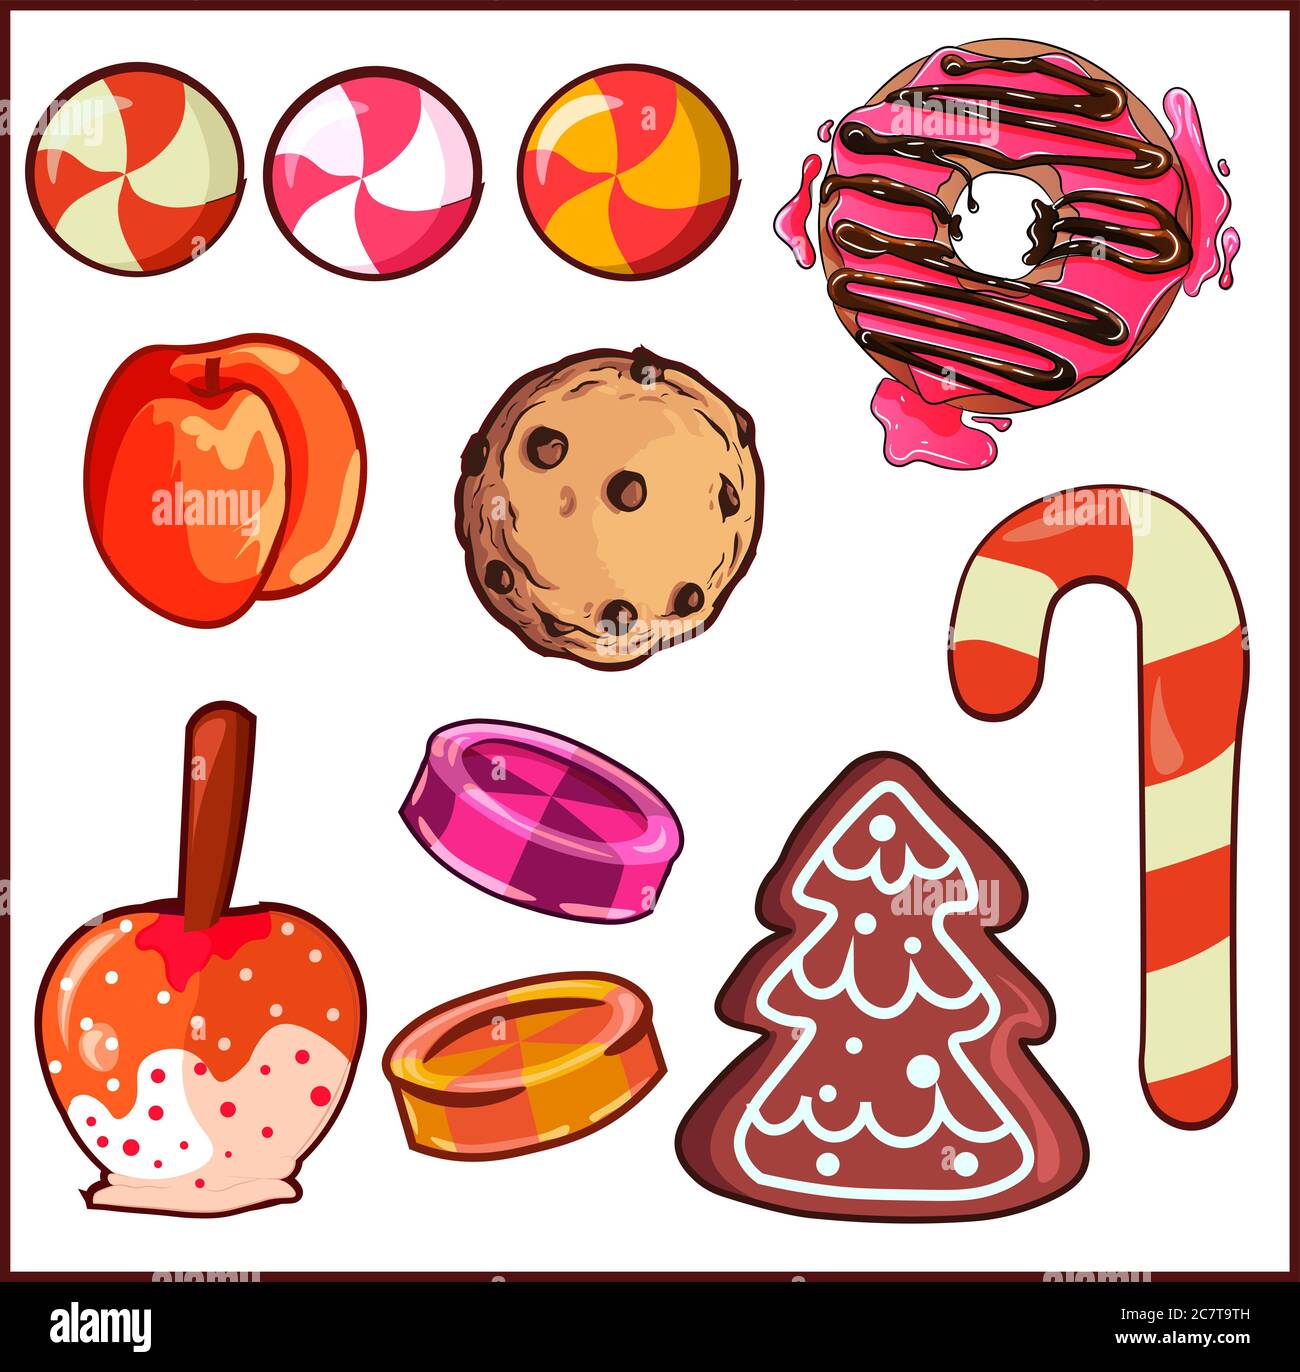 Design elements pack with different type of sweets and desserts. Candies, cookies, fruits and donuts elements pack. Stock Vector